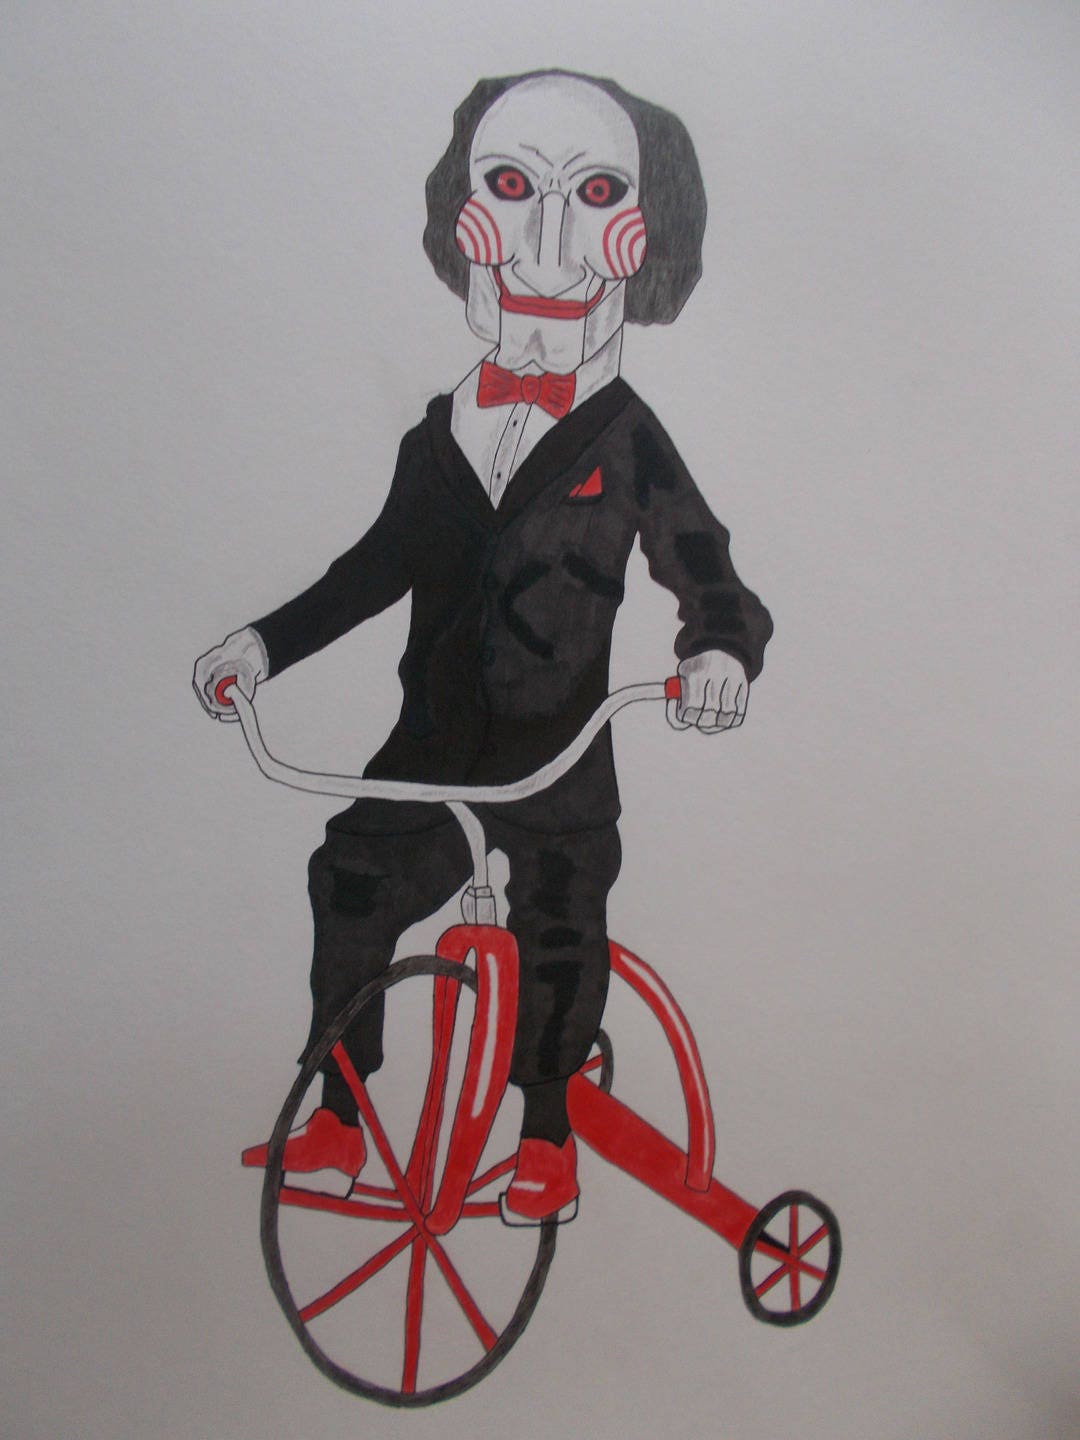 Jigsaw saw drawing with colored pencils and markers